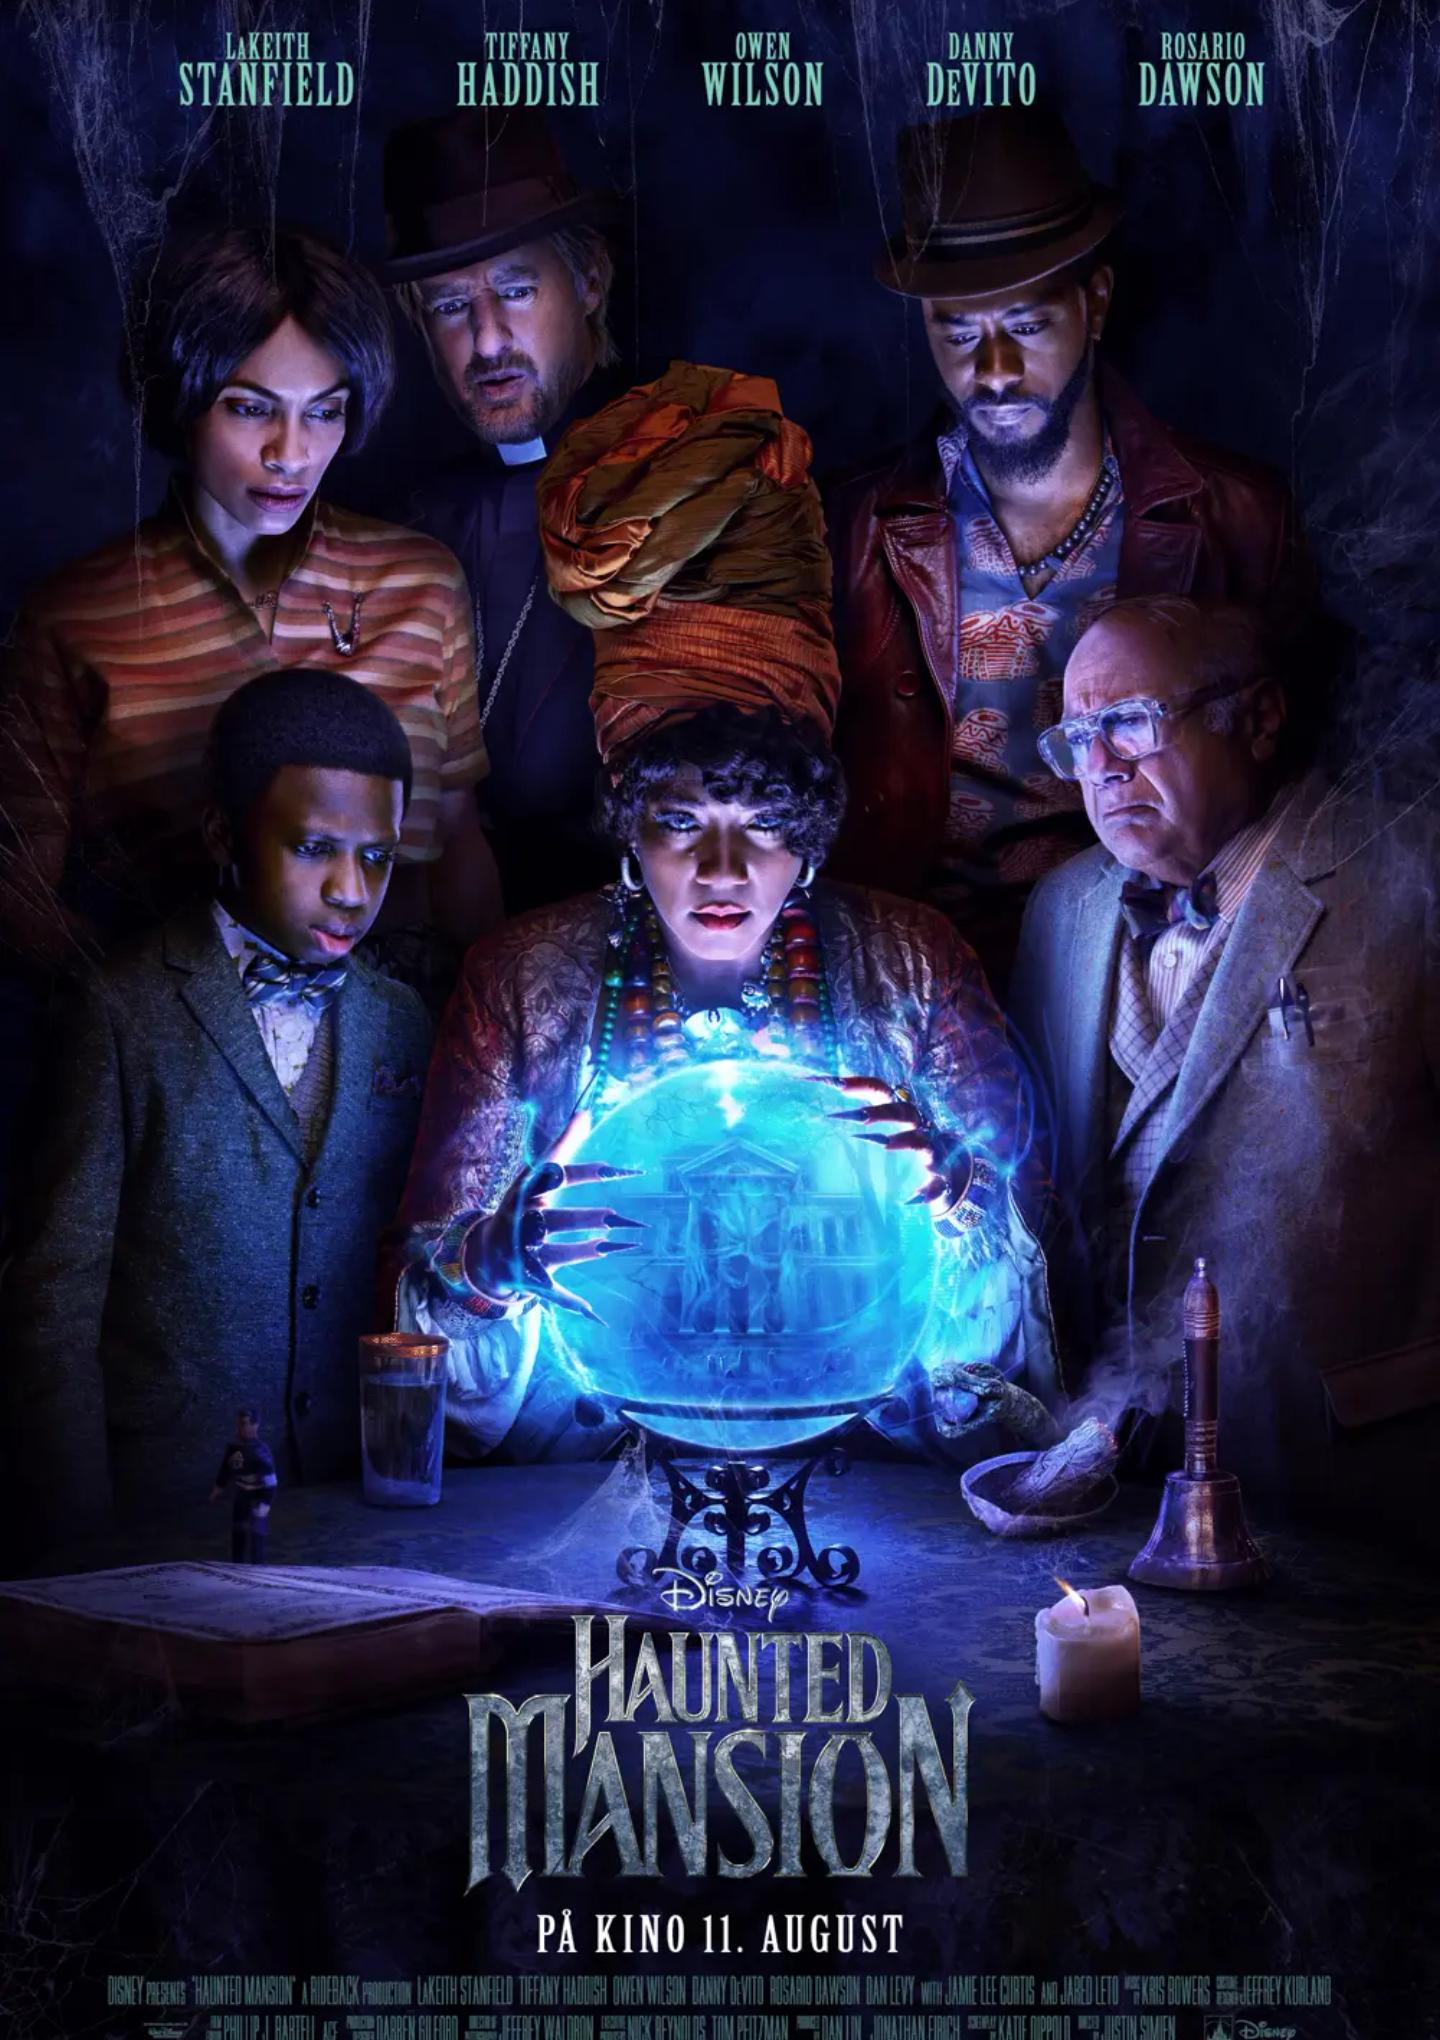 Plakat for 'Haunted Mansion'